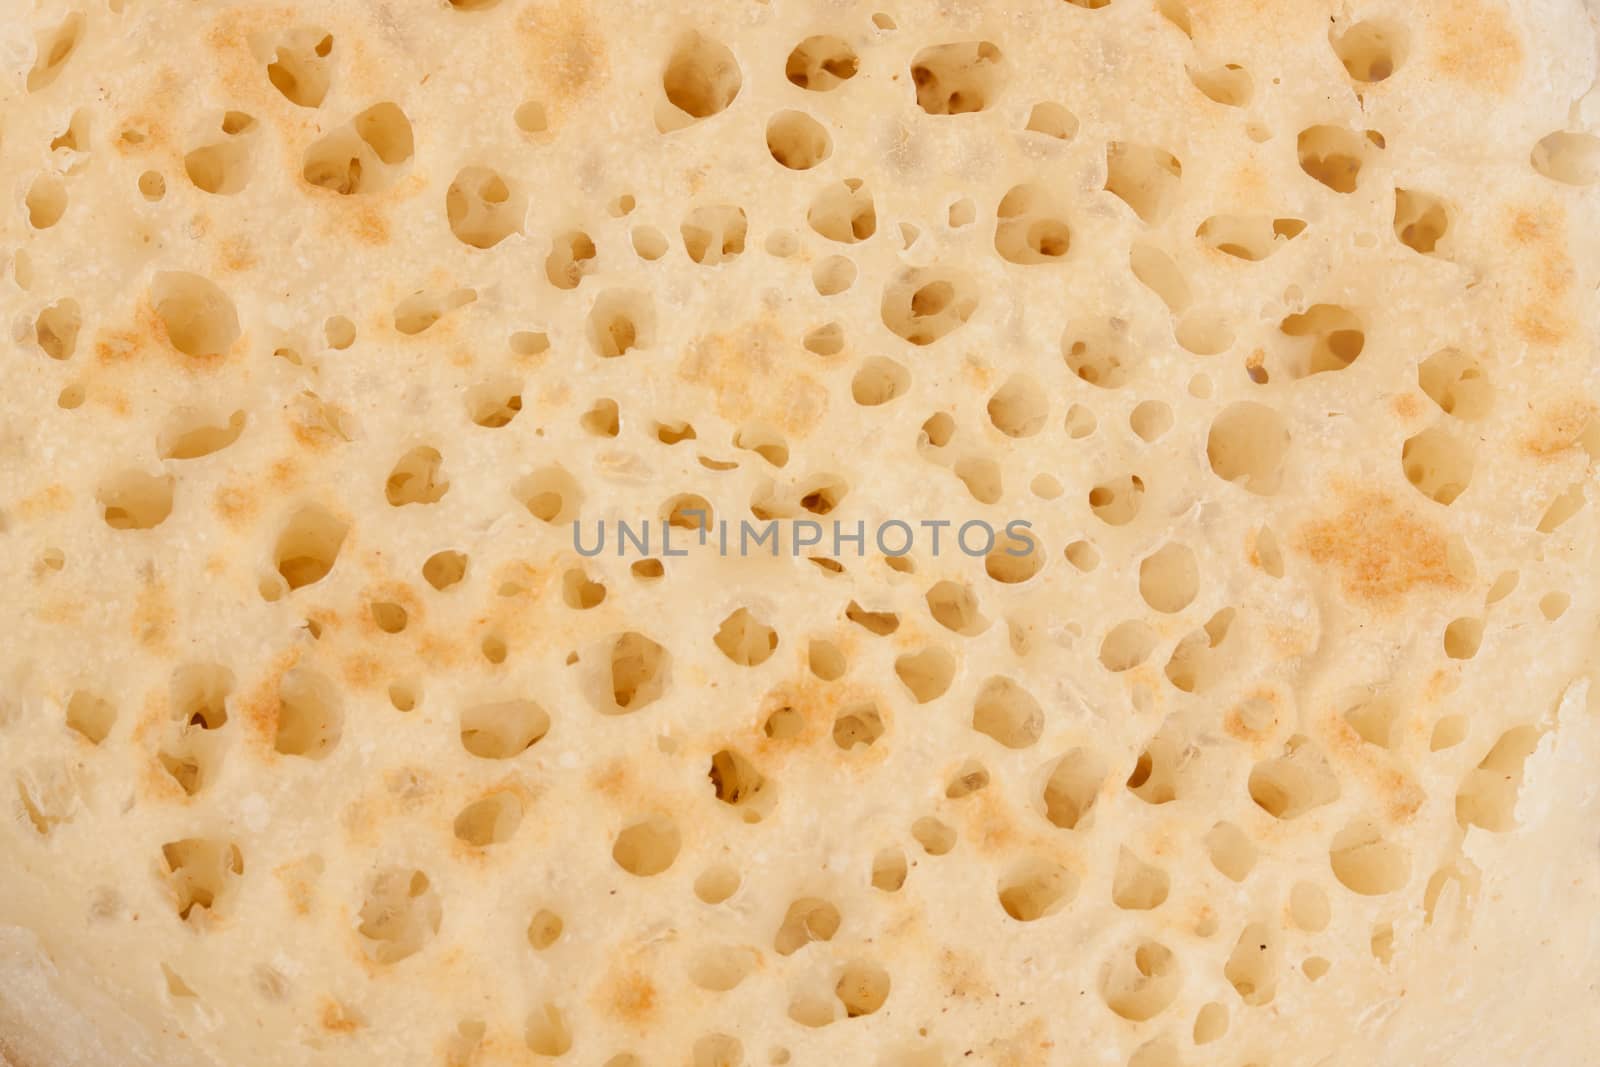 Closeup on the texture of a British breakfast crumpet